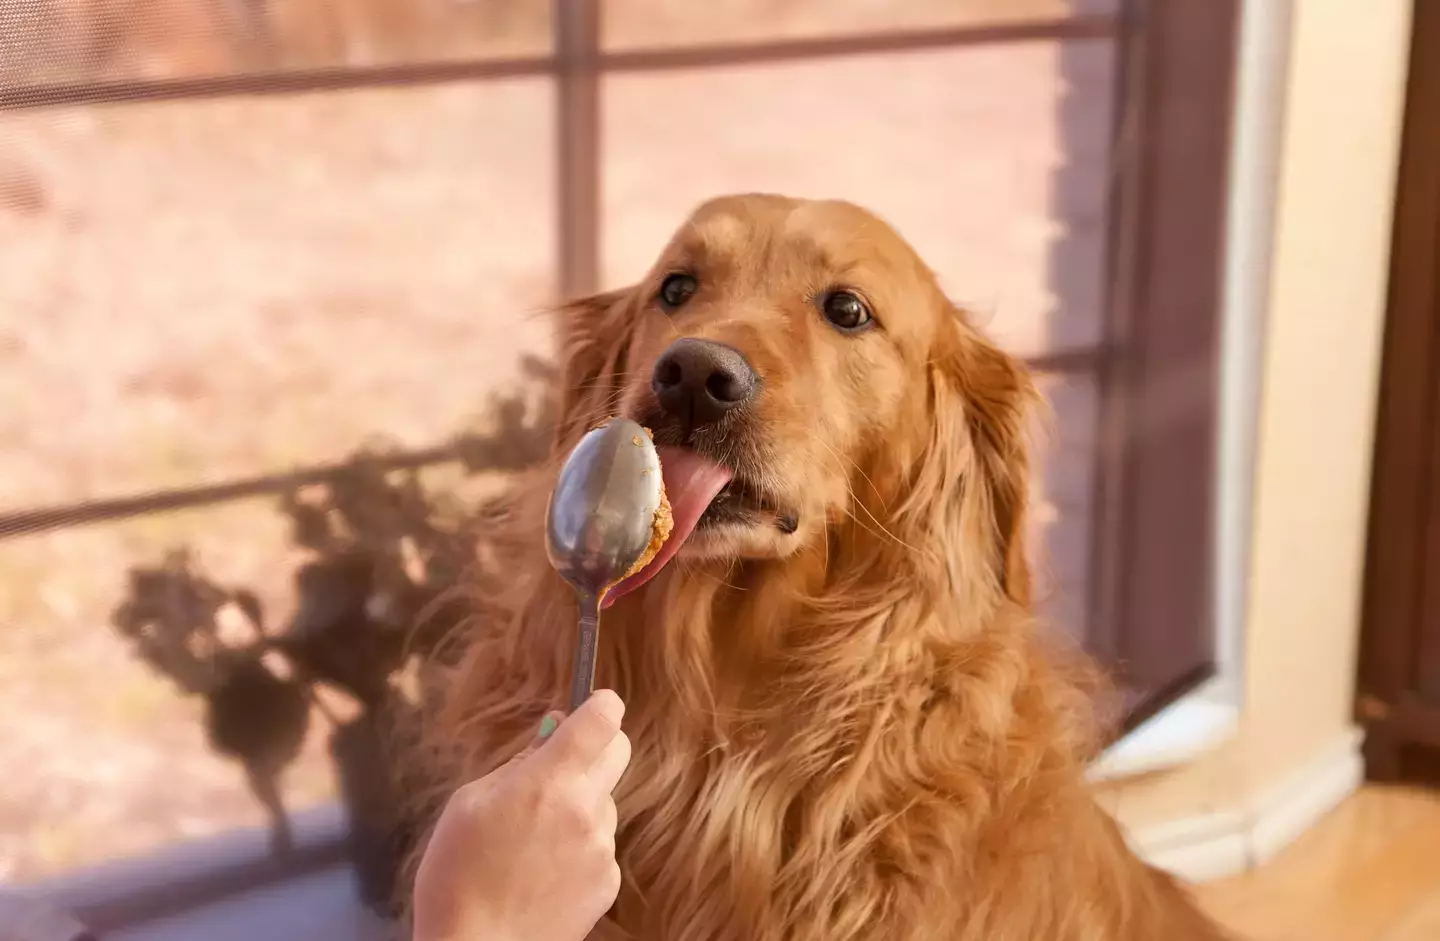 Dogs love peanut butter - but that's not good.